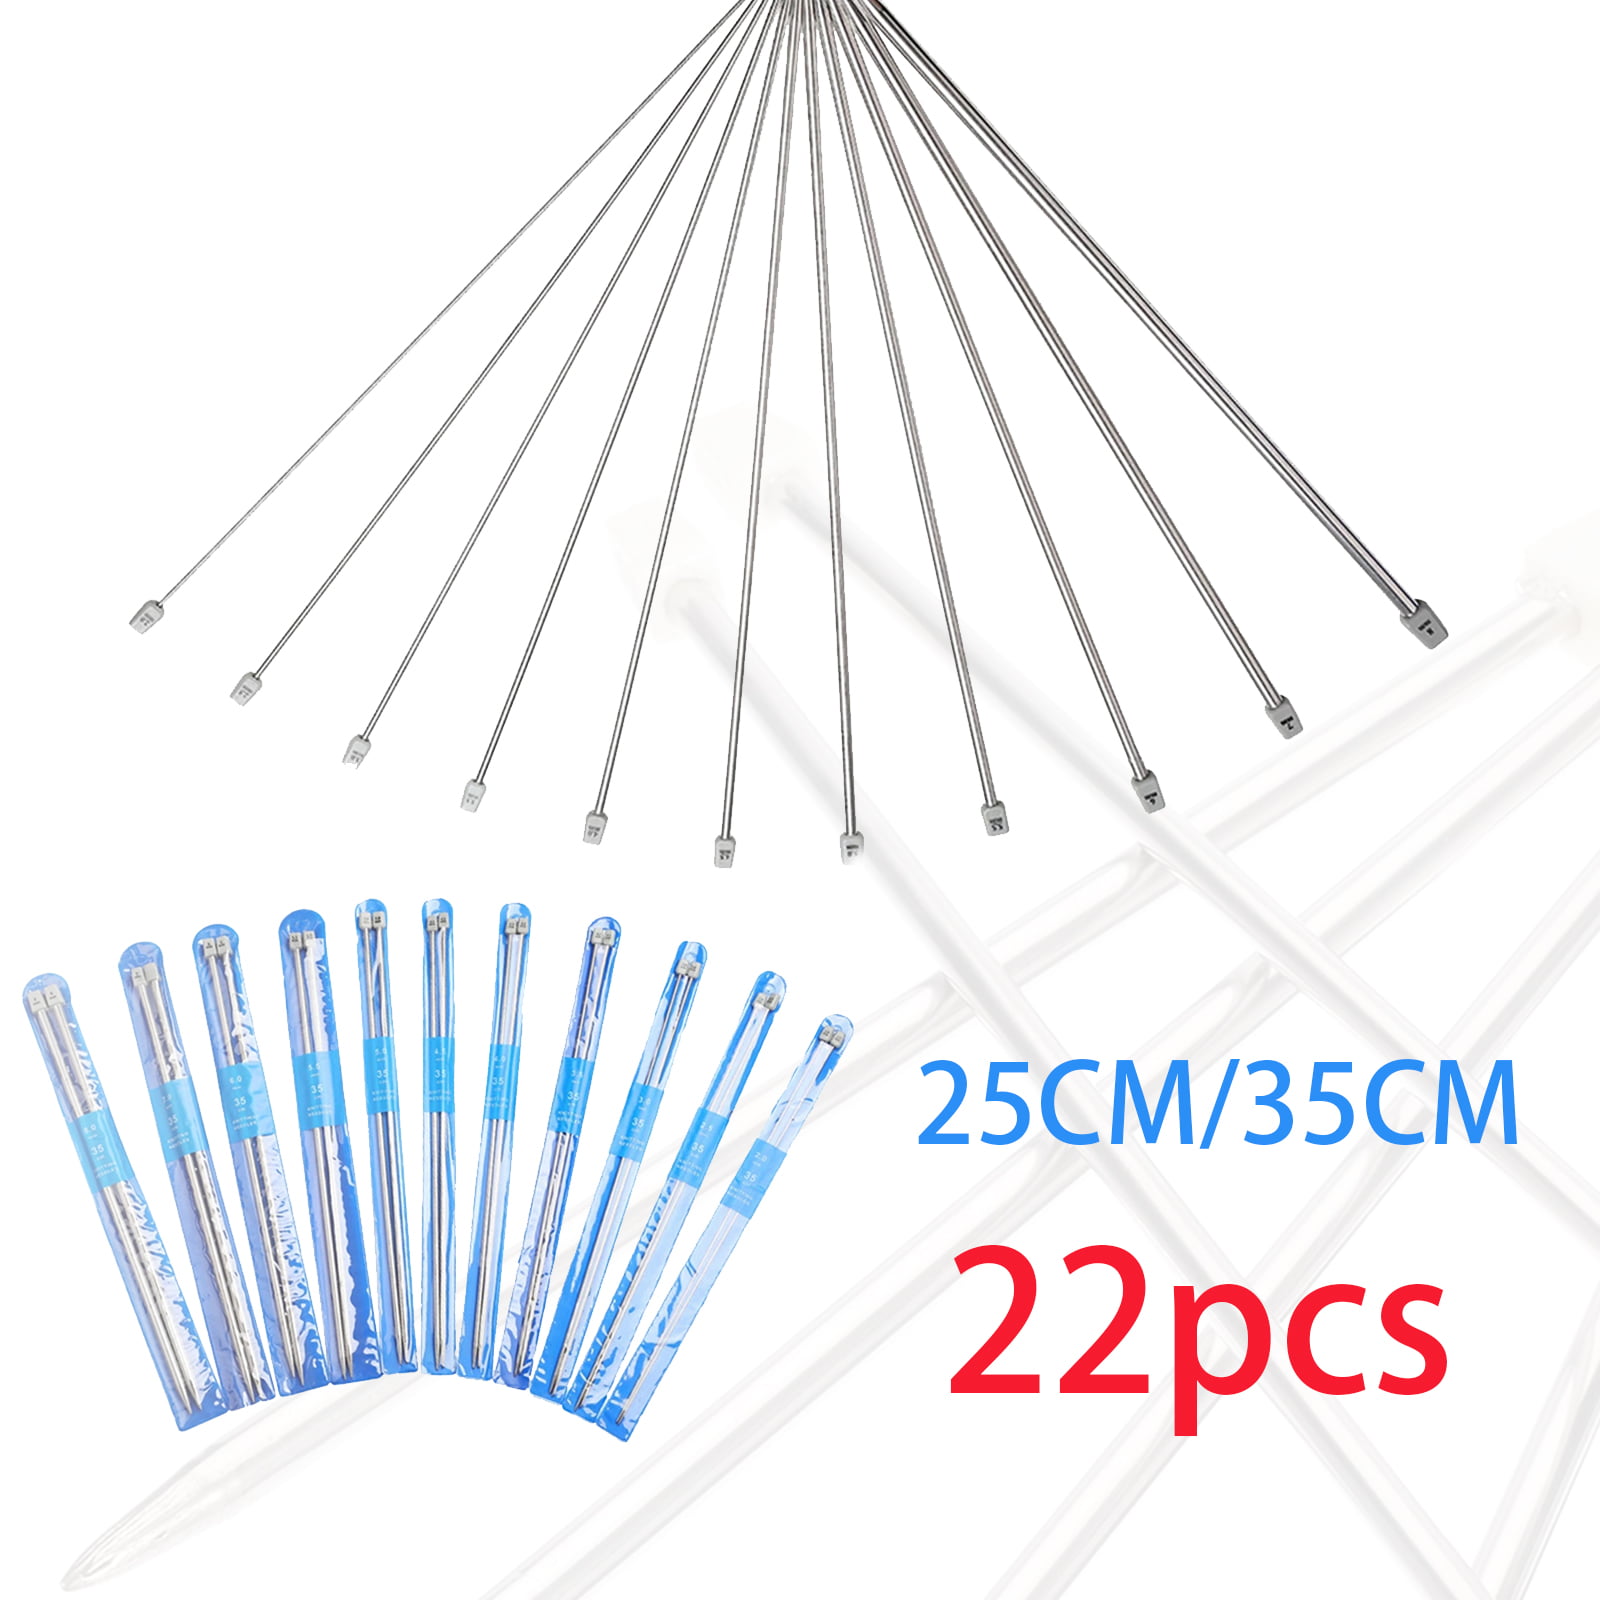 Straight Single Pointed Stainless Steel Sweater Needles with Locking Stitch Makers Large-Eye Blunt Needle 14 Pairs Knitting Needle Set 2mm- 10mm